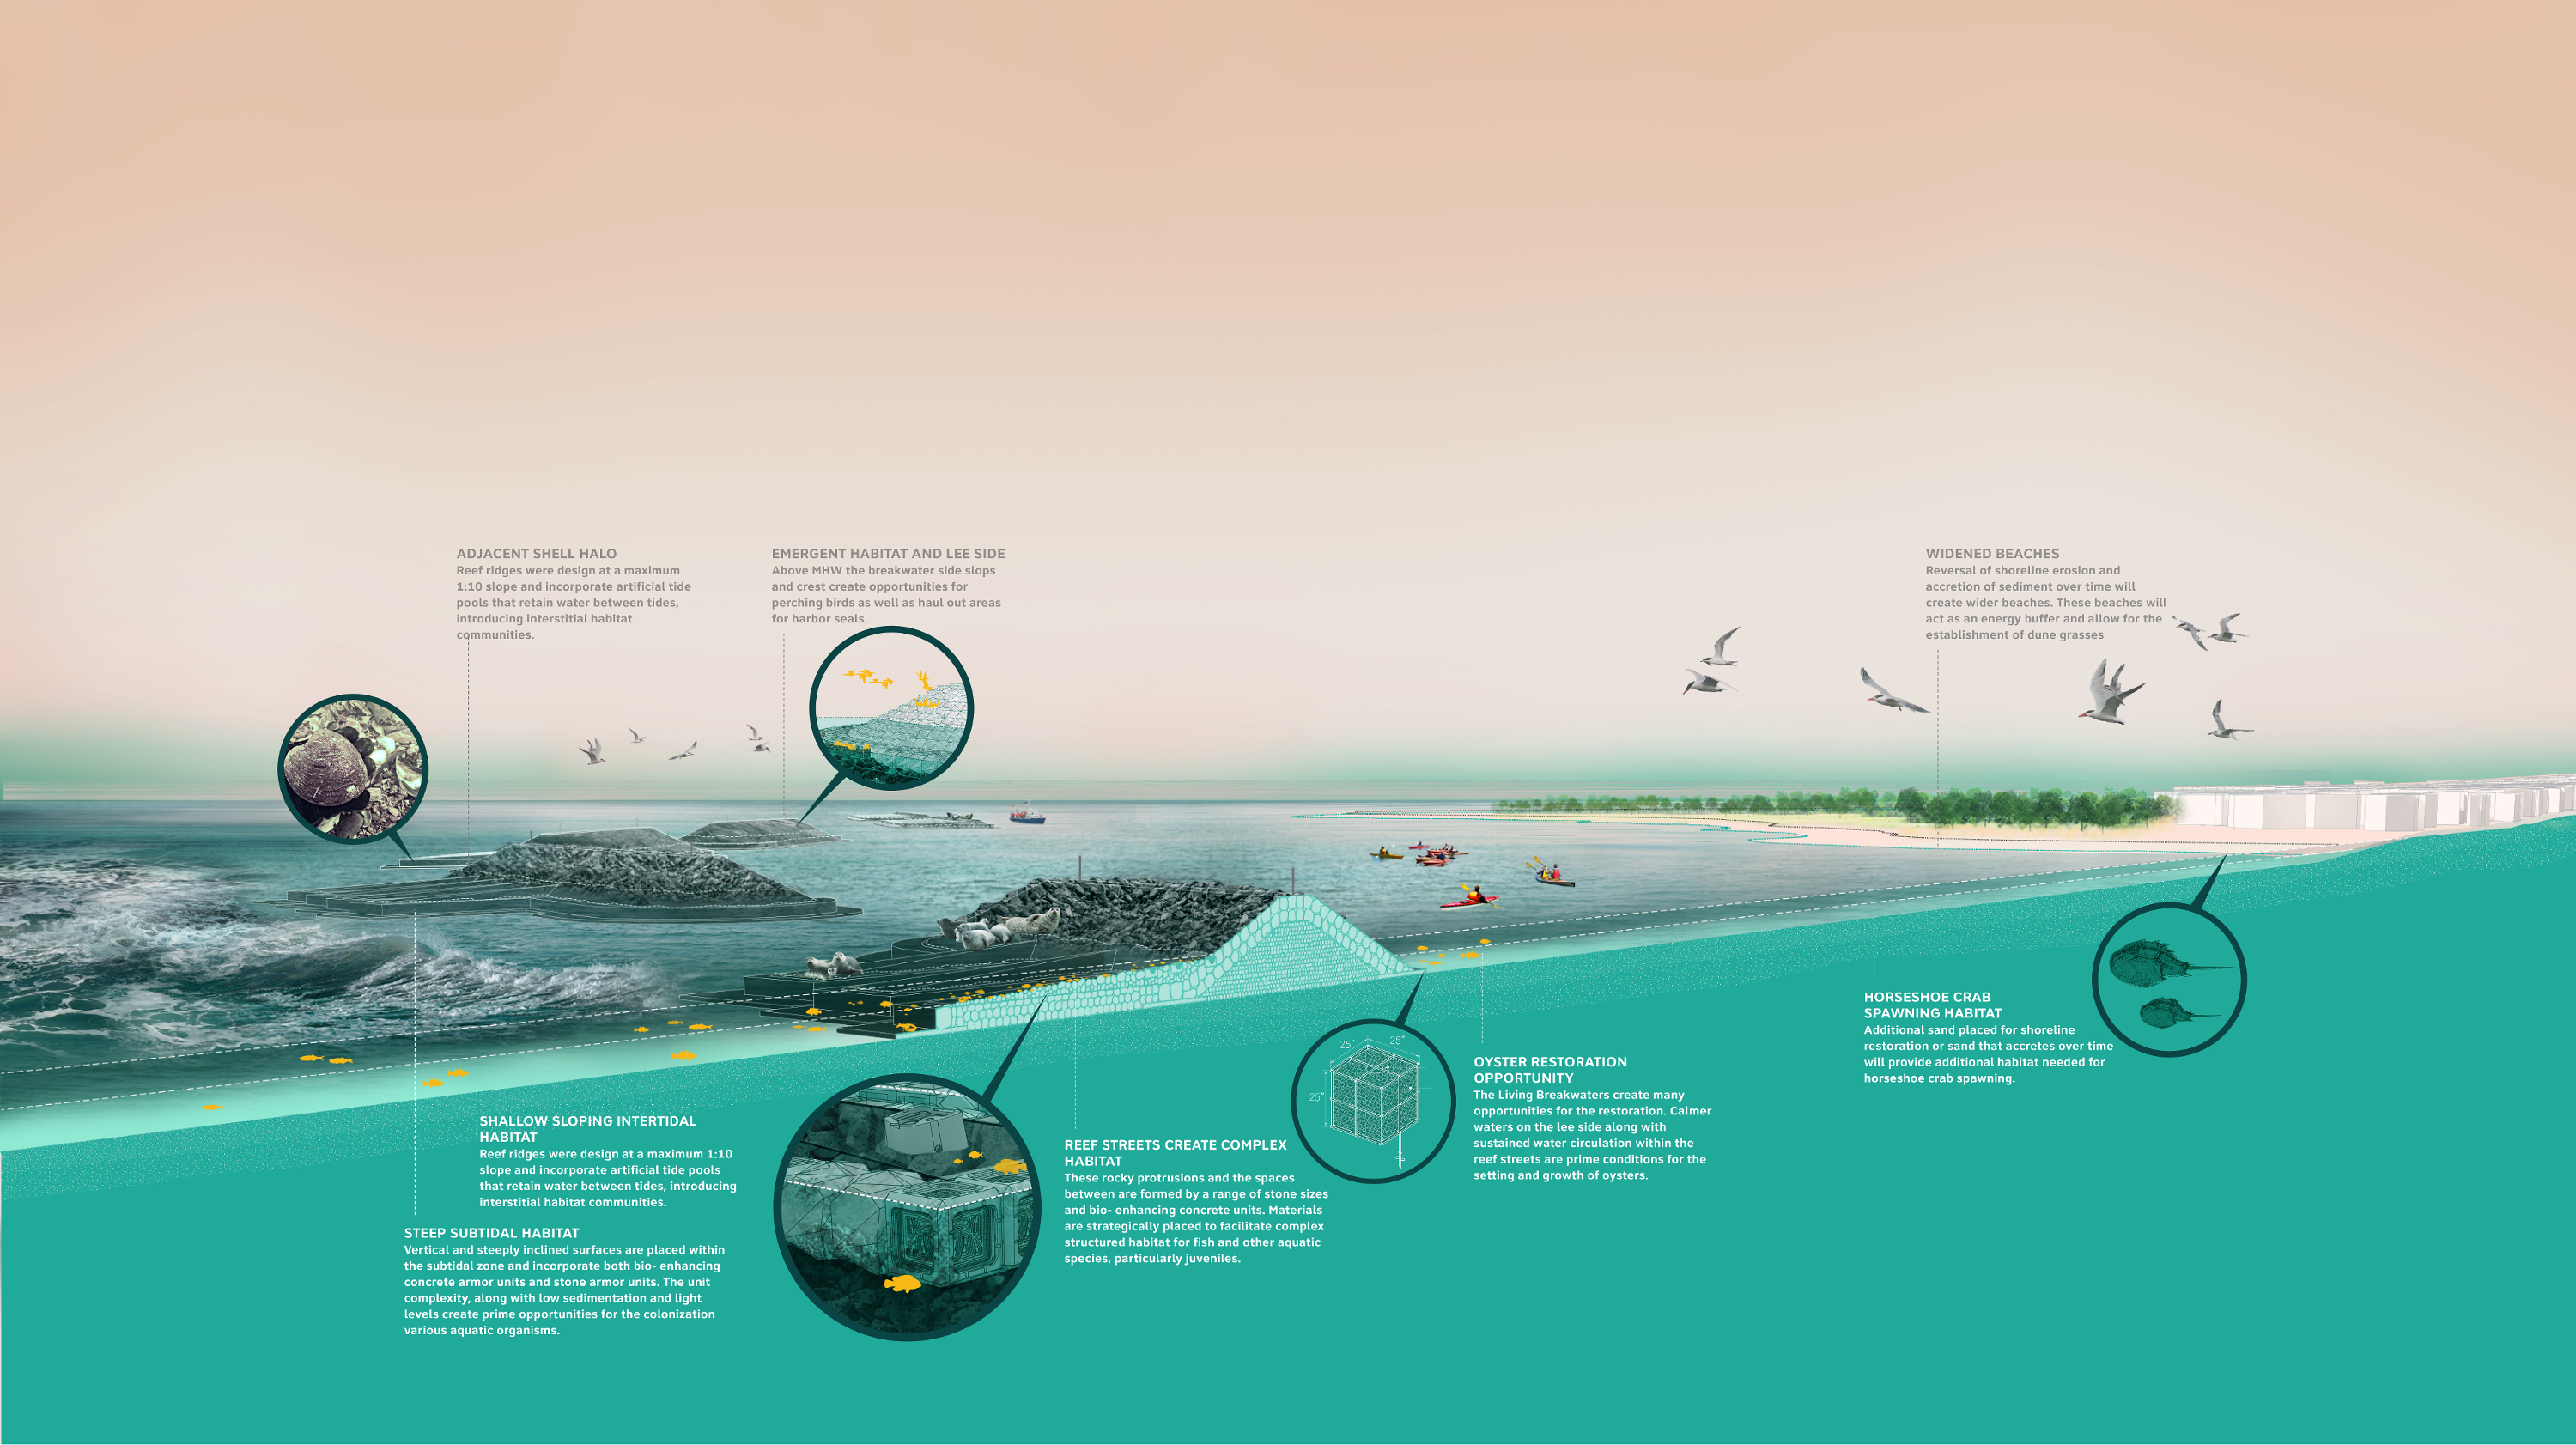 A schematic that illustrates, describes, and explains the different components of the Living Breakwaters.